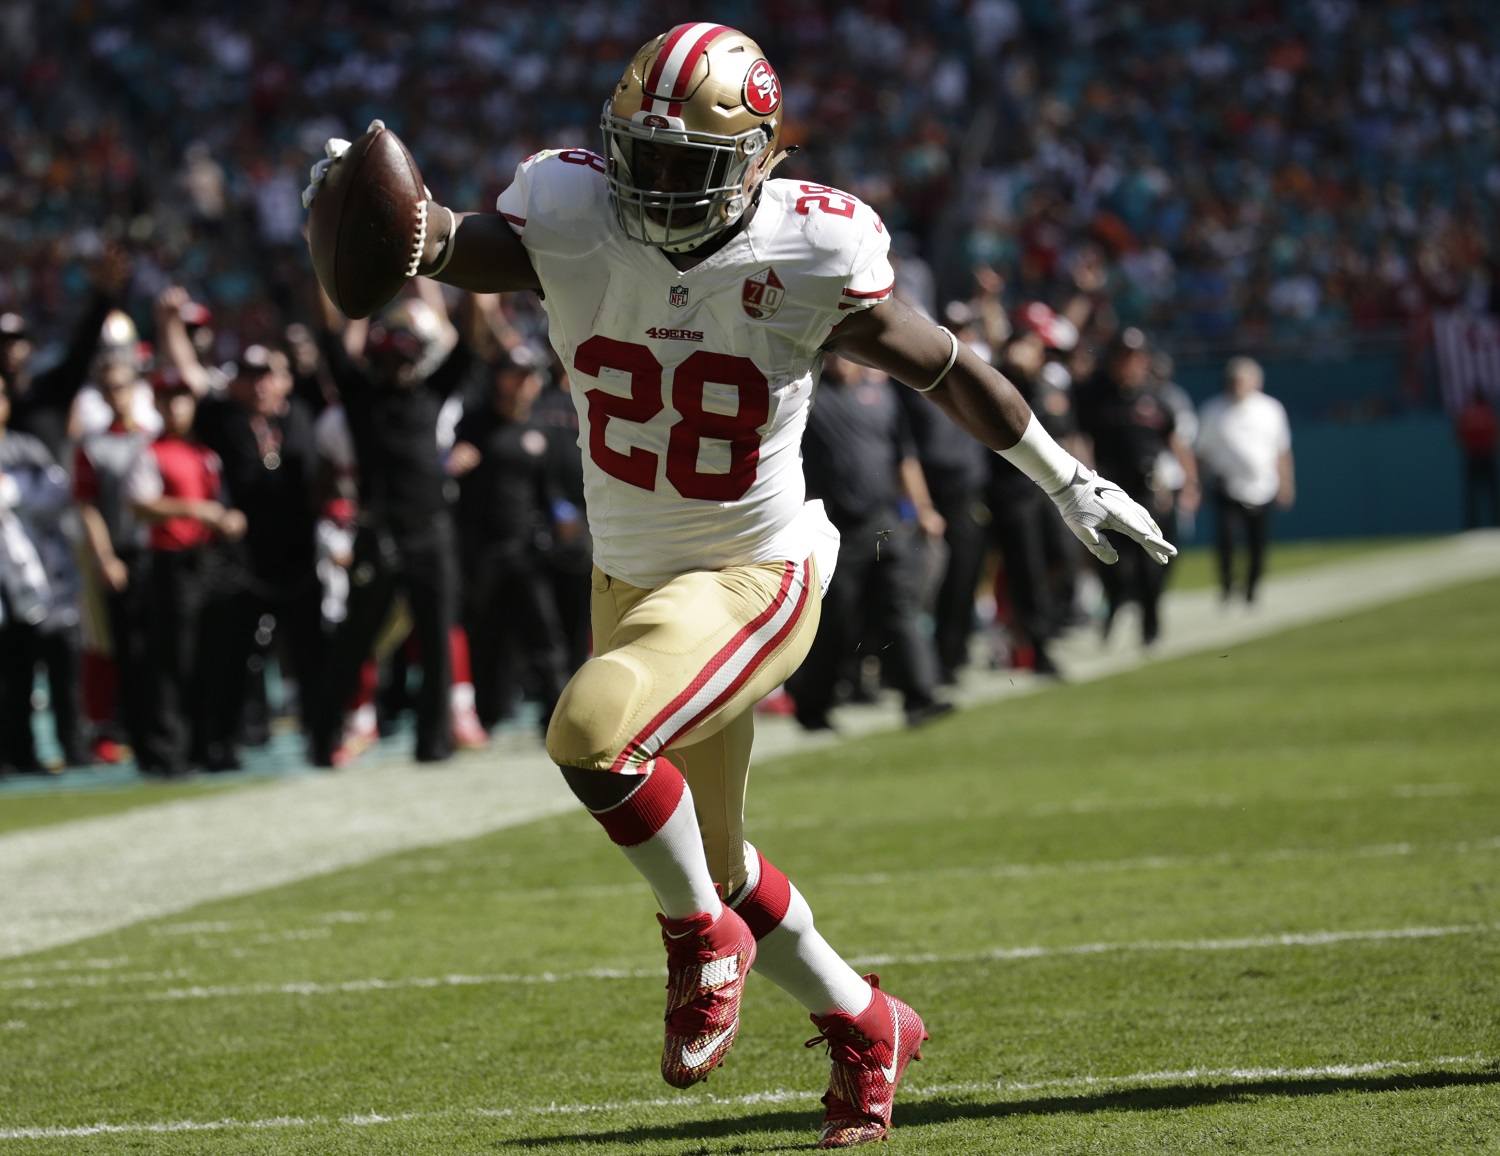 San Francisco 49ers running back Carlos Hyde (28) runs for a touchdown during the first half of an NFL football game against the Miami Dolphins, Sunday, Nov. 27, 2016, in Miami Gardens, Fla. (AP Photo/Lynne Sladky)